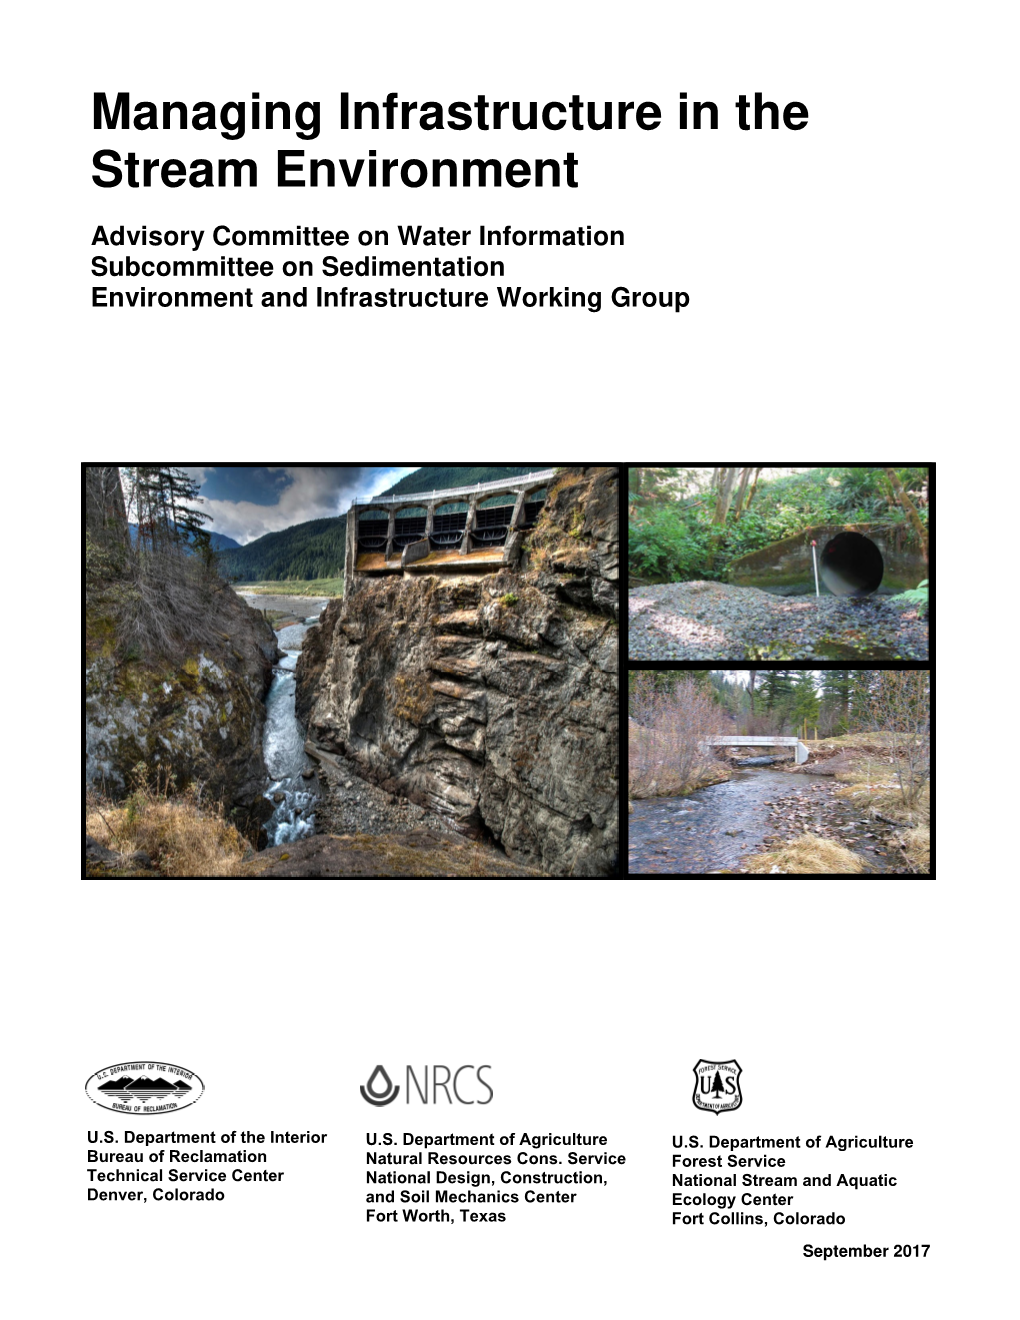 Managing Infrastructure in the Stream Environment